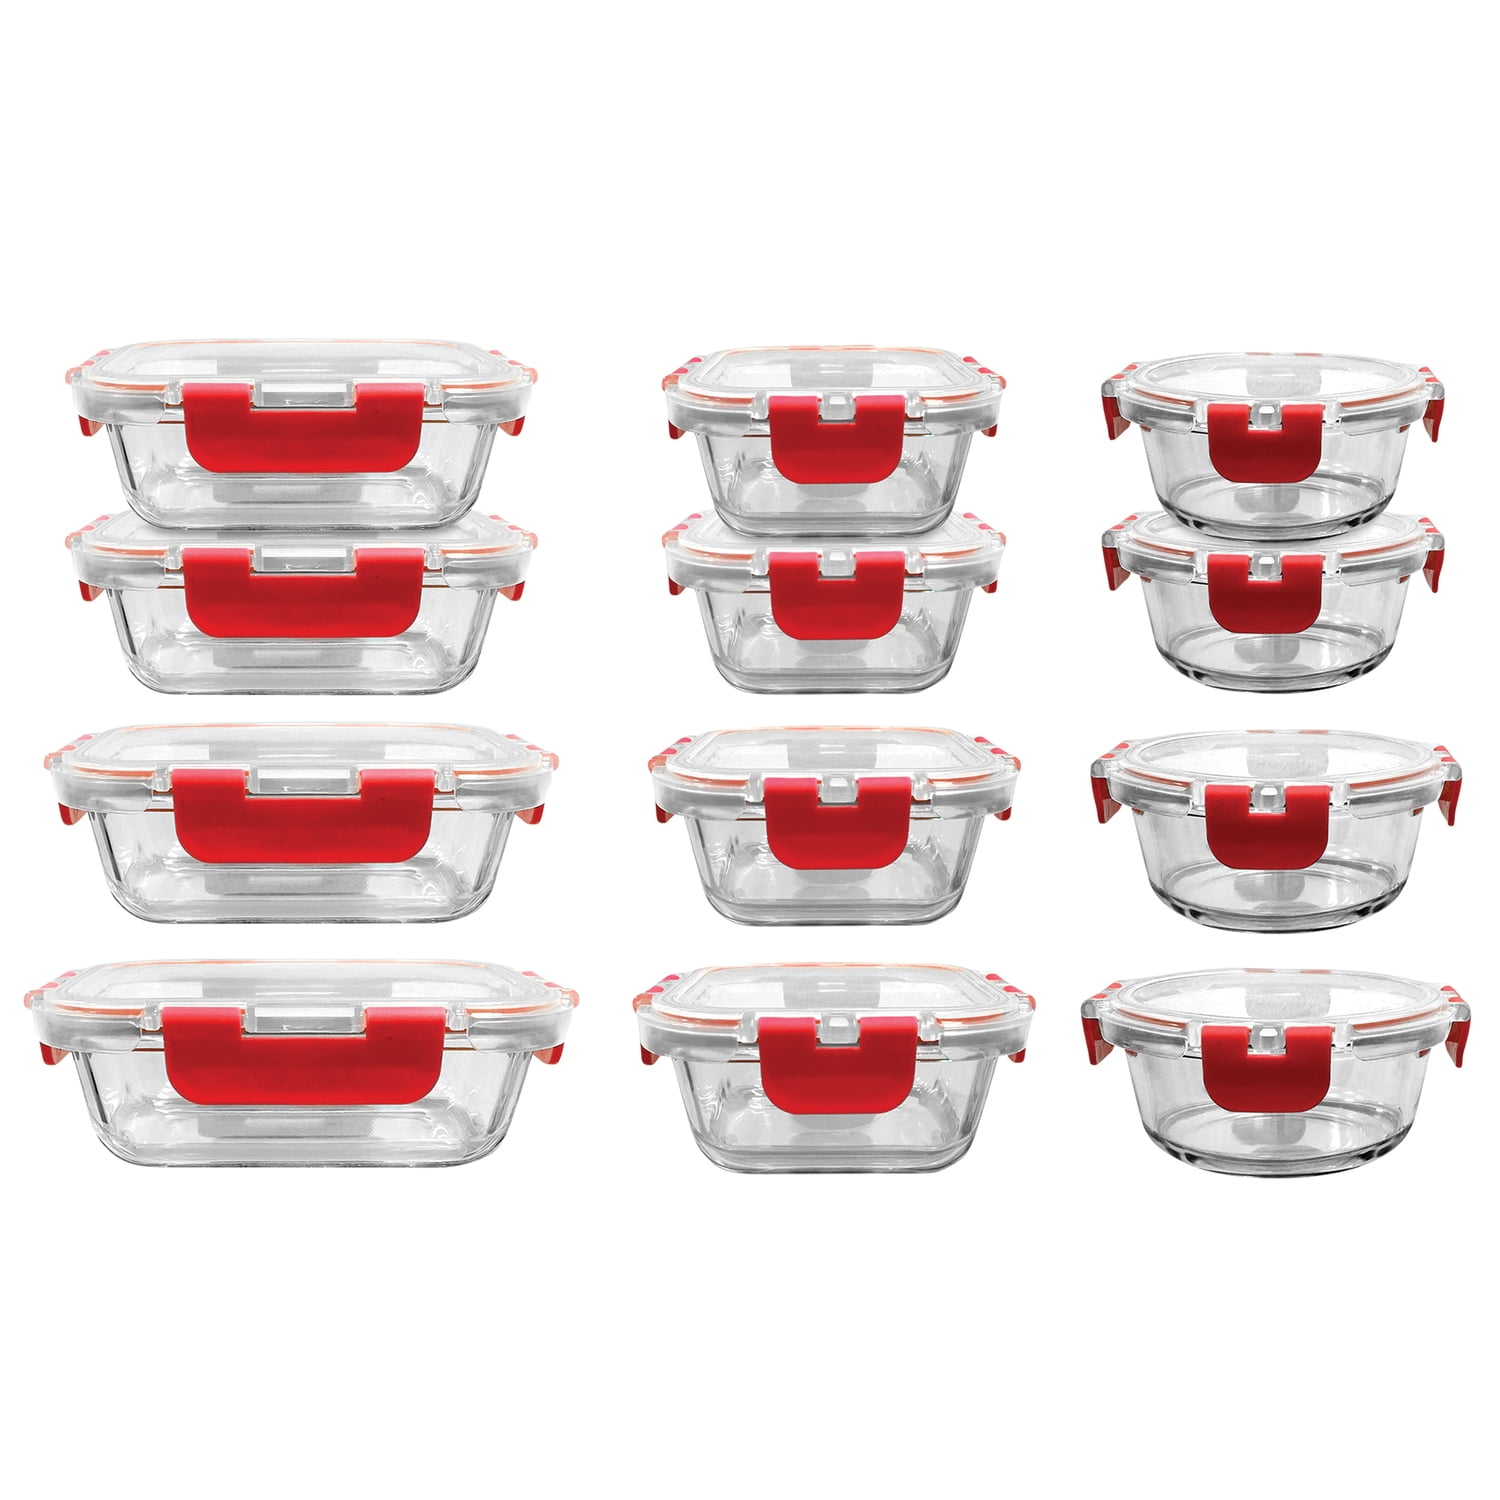  S SALIENT 18 Piece Glass Food Storage Containers with Lids,  Meal Prep Containers for Food Storage, BPA Free & Leak Proof (9 lids & 9  Containers): Home & Kitchen